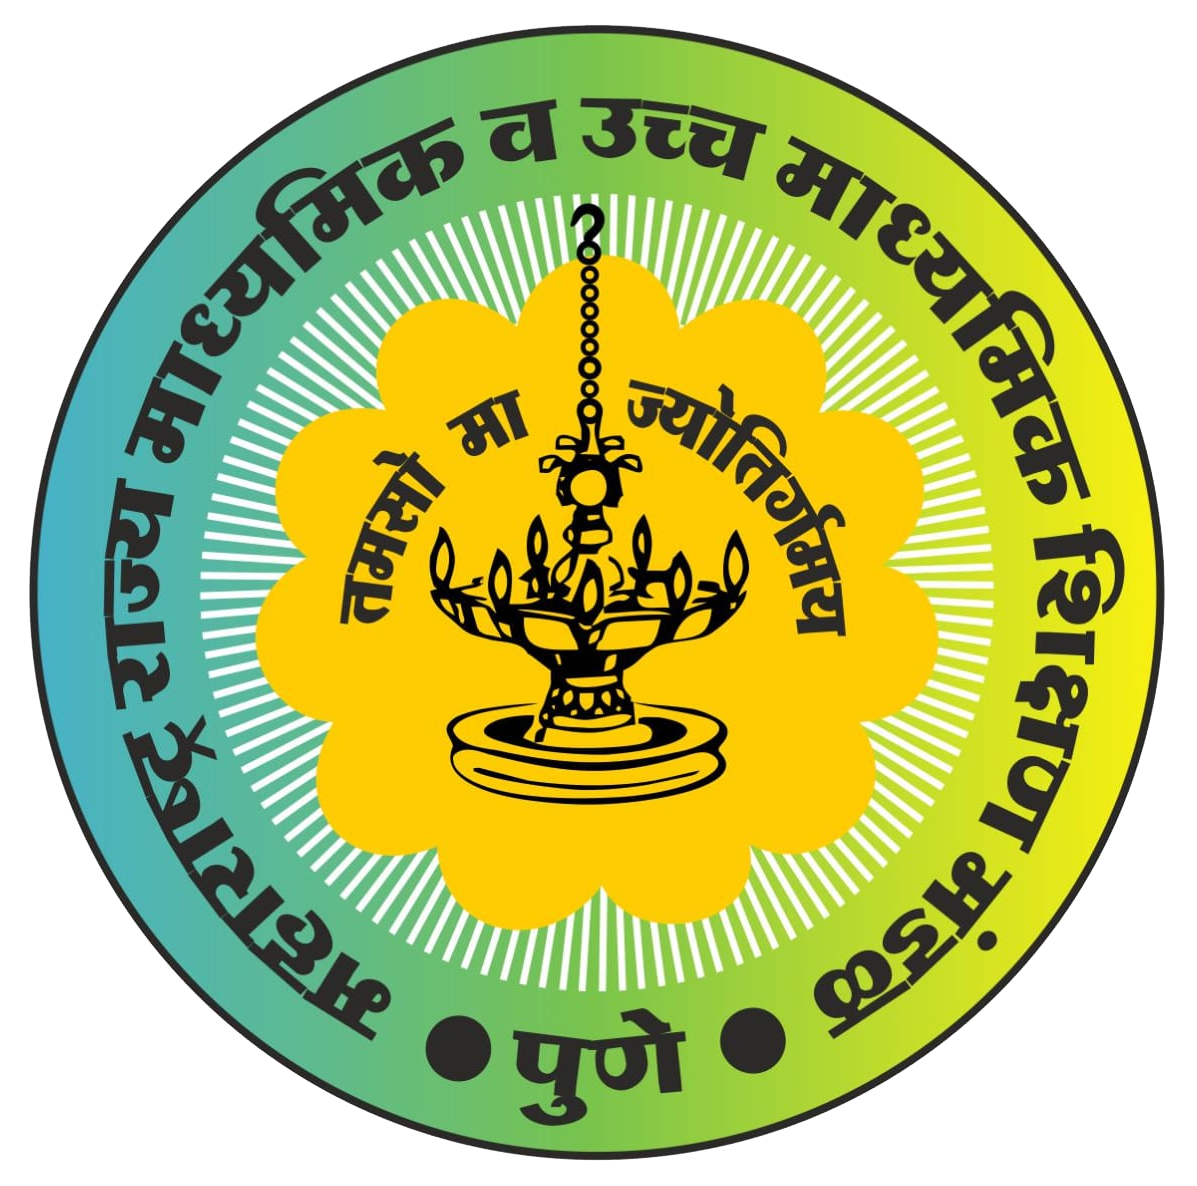 Maharashtra State Board of Secondary and Higher Secondary Education, Pune